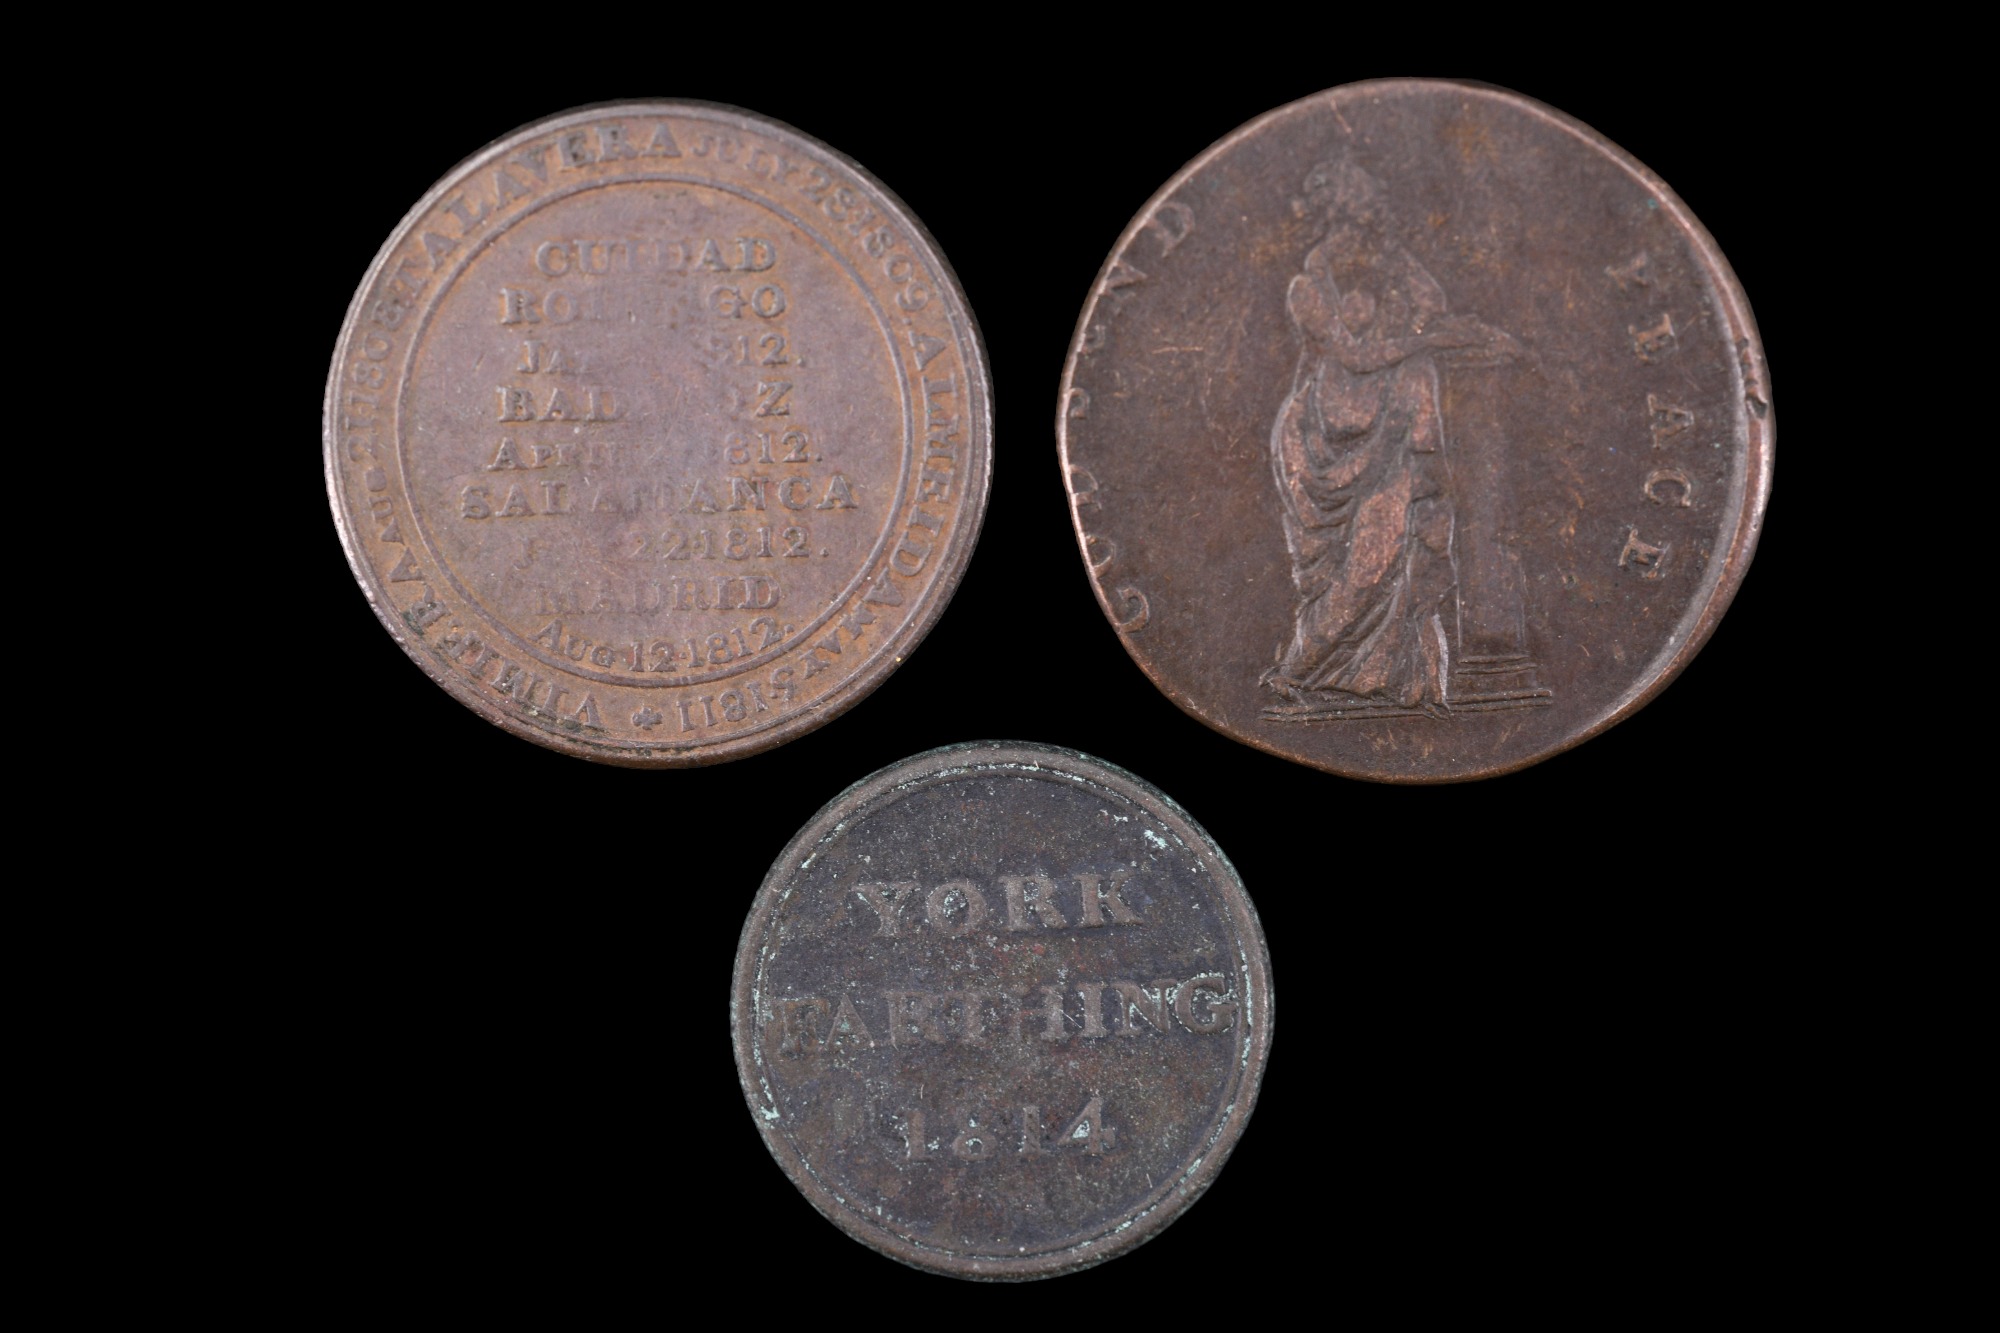 A late 18th Century Middlesex, National Series, "Duke of York - Peace" 1/2 penny copper Conder token